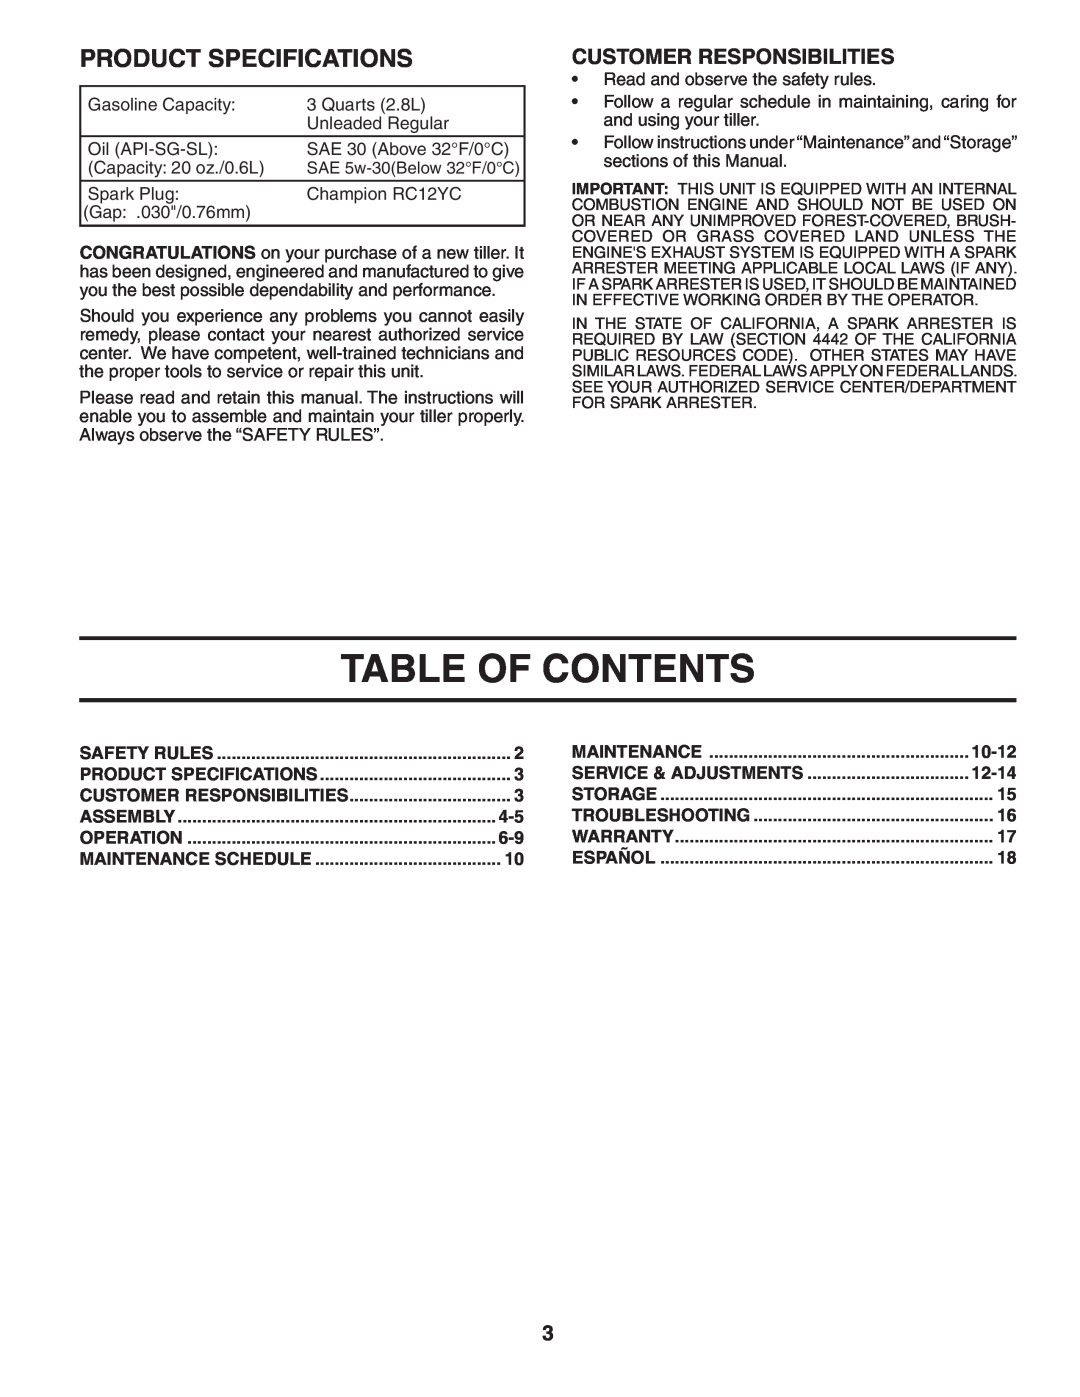 Poulan HDF550 manual Table Of Contents, Product Specifications, Customer Responsibilities, 10-12, 12-14 